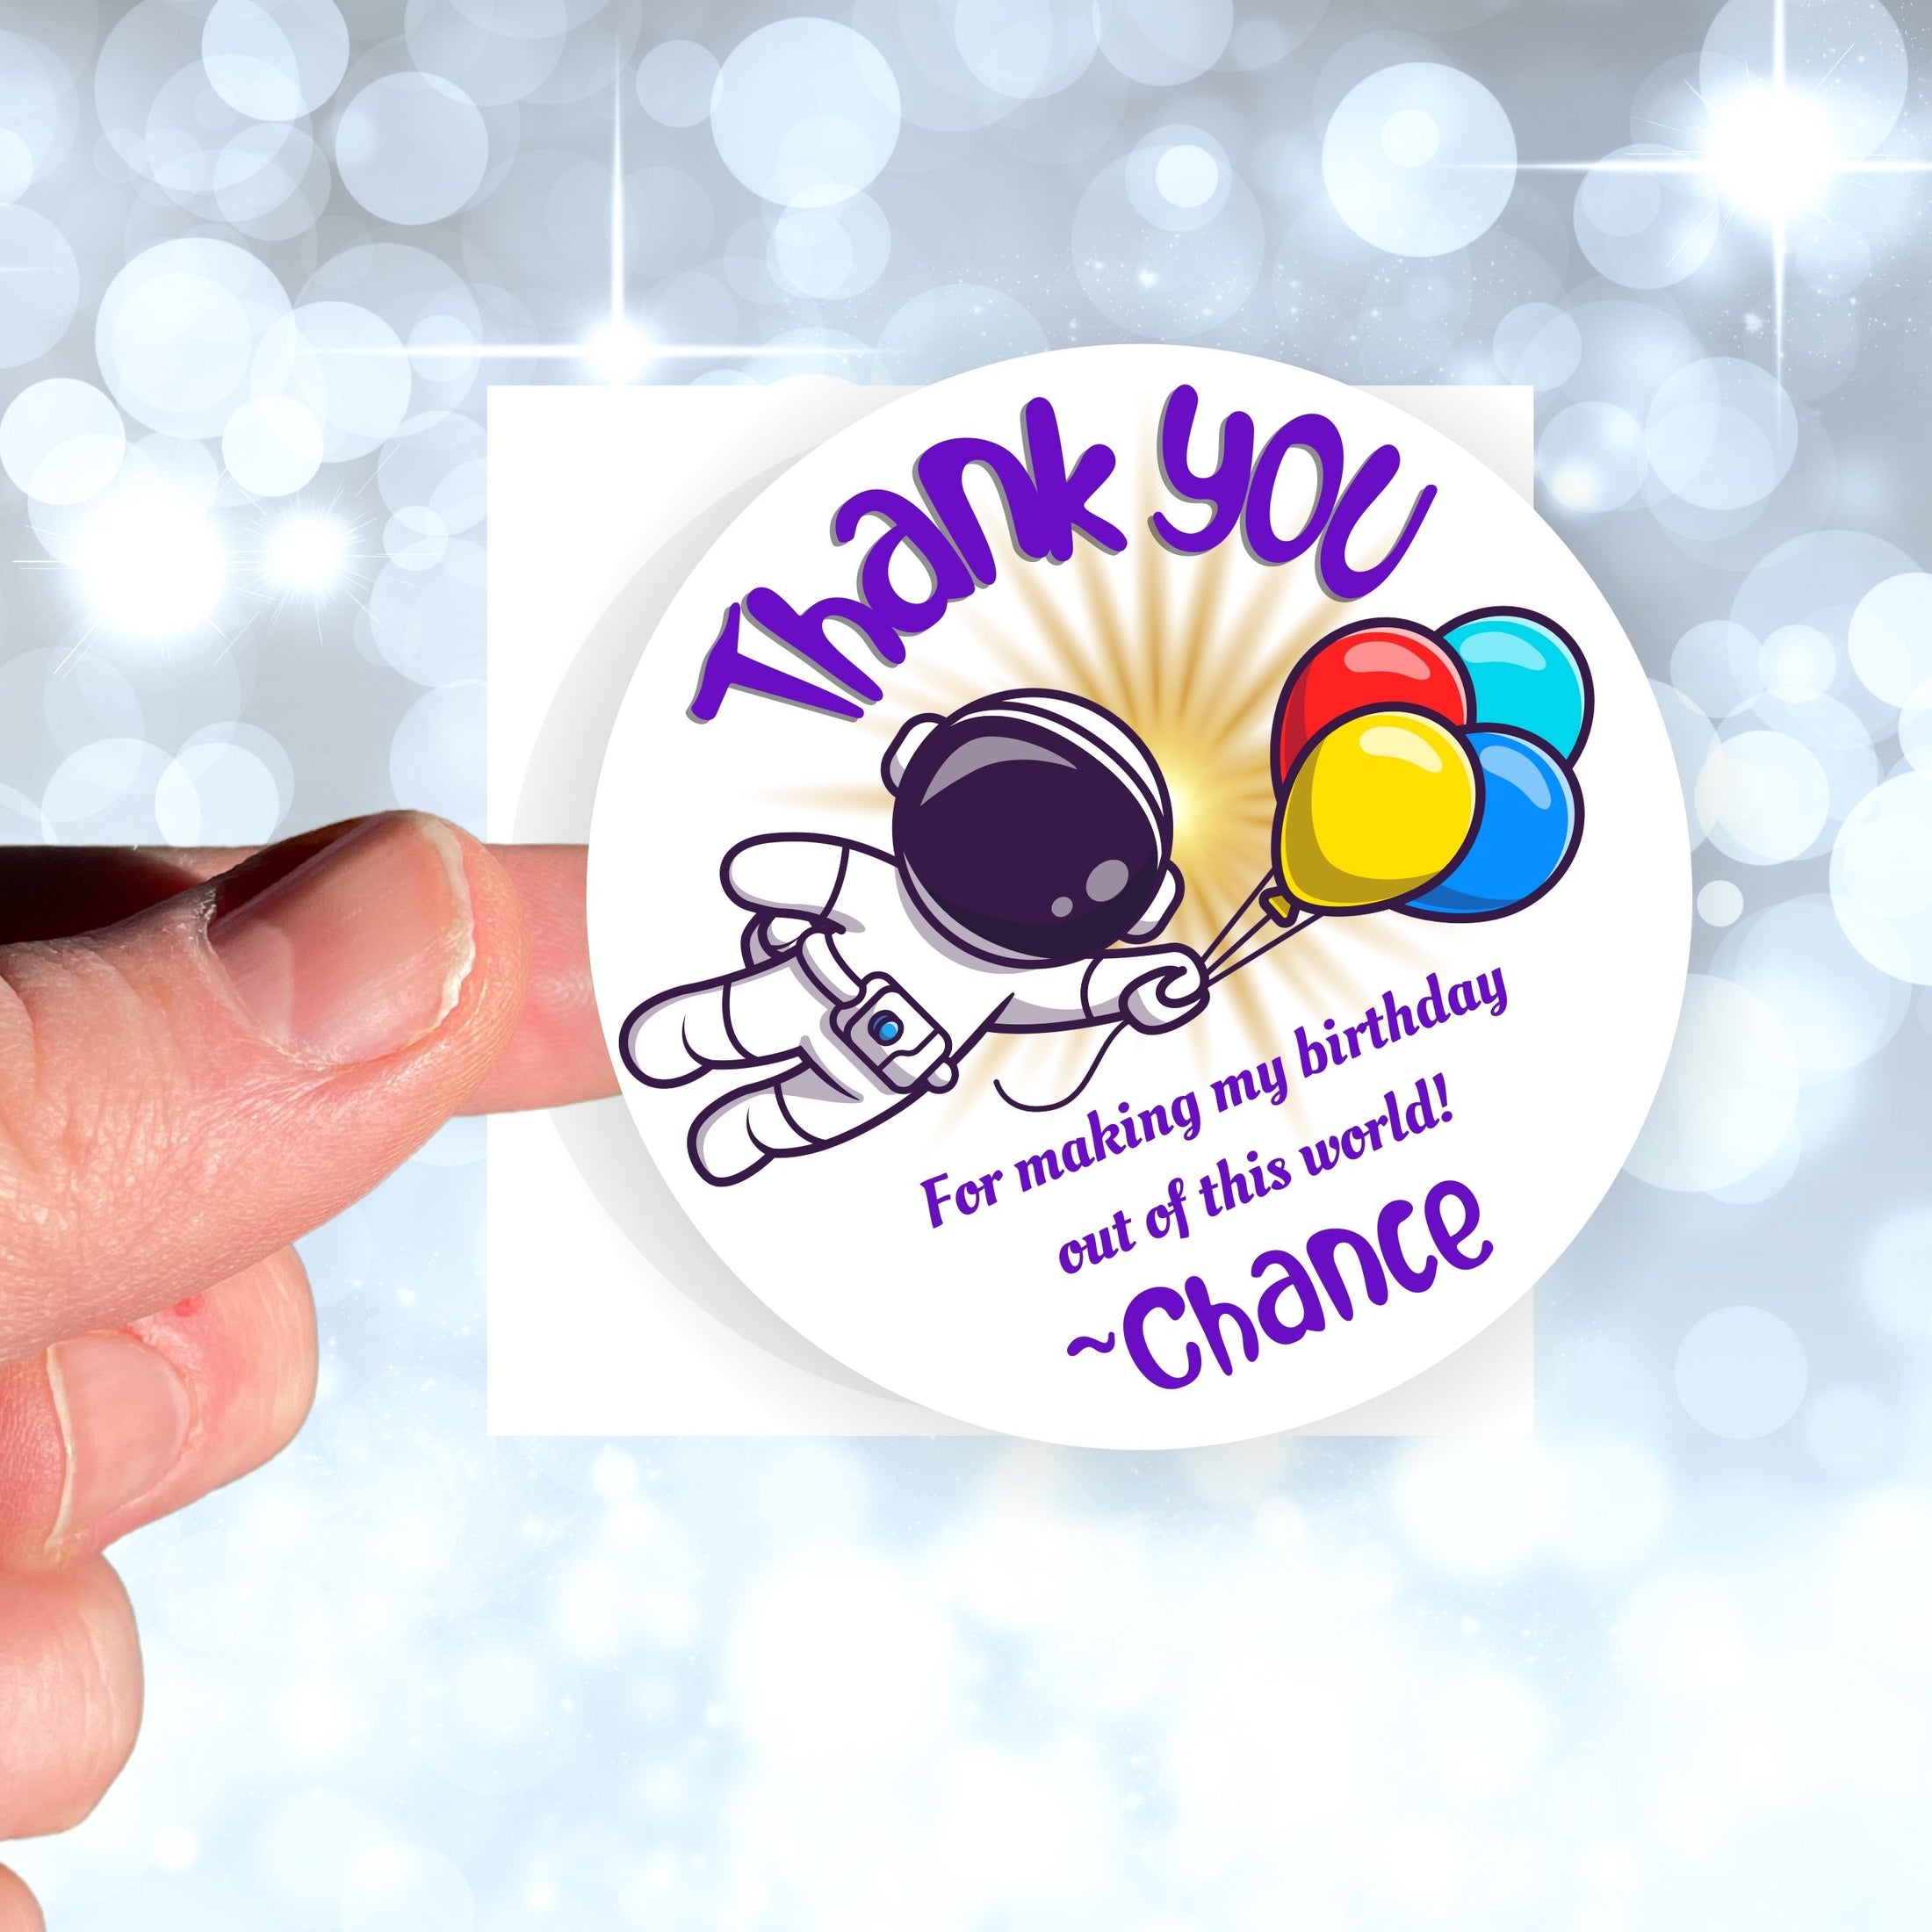 This image shows a hand holding the personalized astronaut themed thank you sticker.